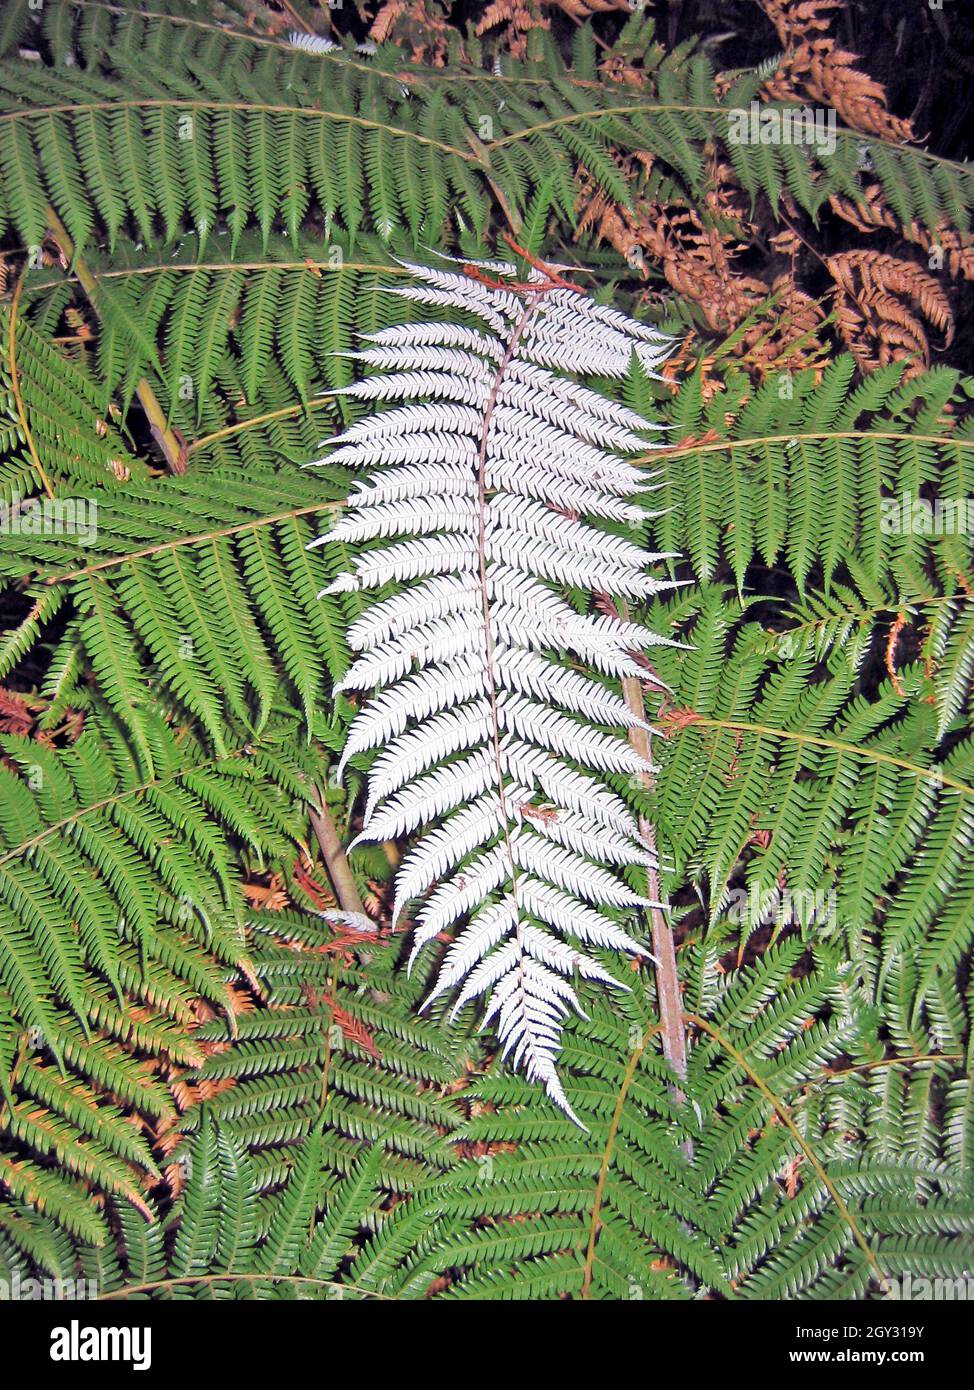 The New Zealand Silver Fern is endemic to this island nation becoming a national symbol.  The underside of the traditional green fern is silver, when mature.  The Maori, the indigenous people of New Zealand, would use the silver side to mark trails so at night so they could find their way back home.  The silver fern is representative of the people and land of New Zealand. Stock Photo